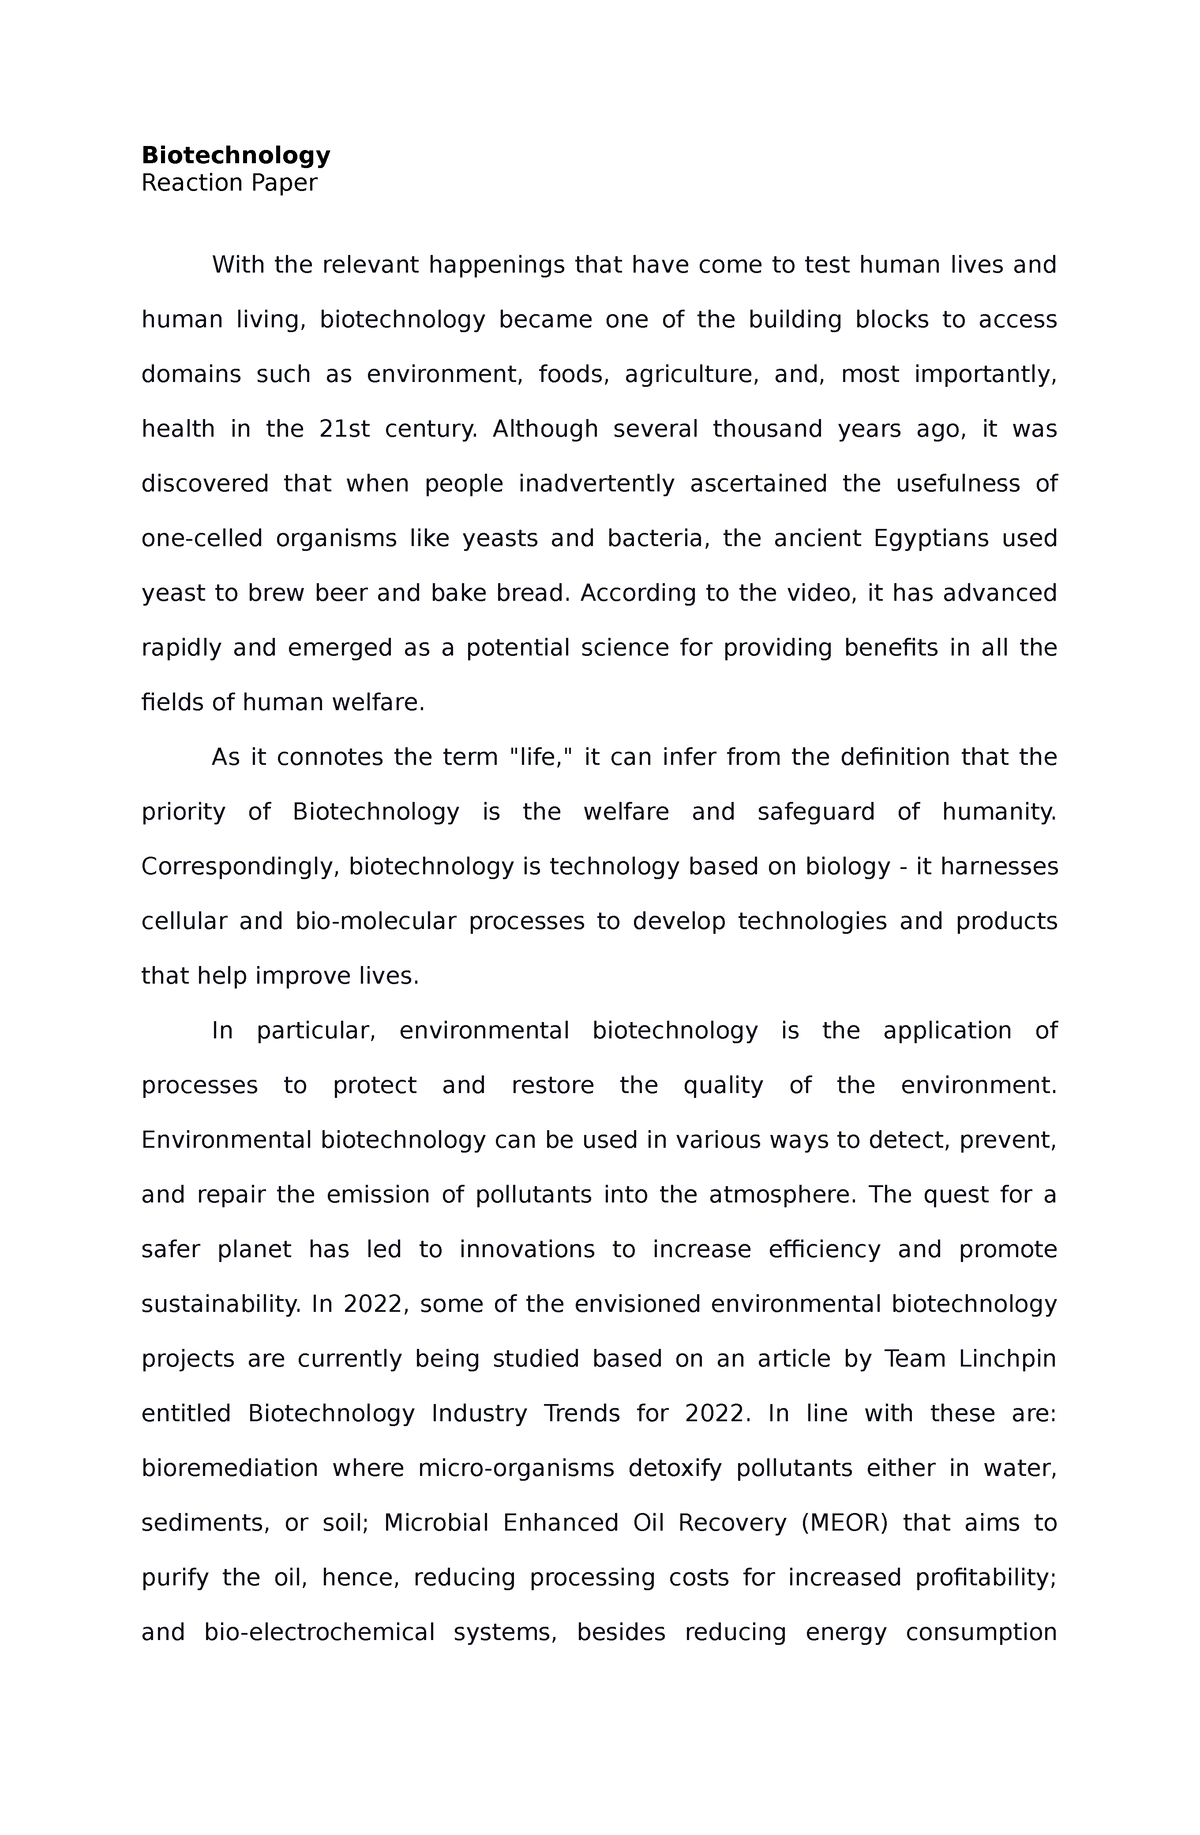 thesis paper biotechnology